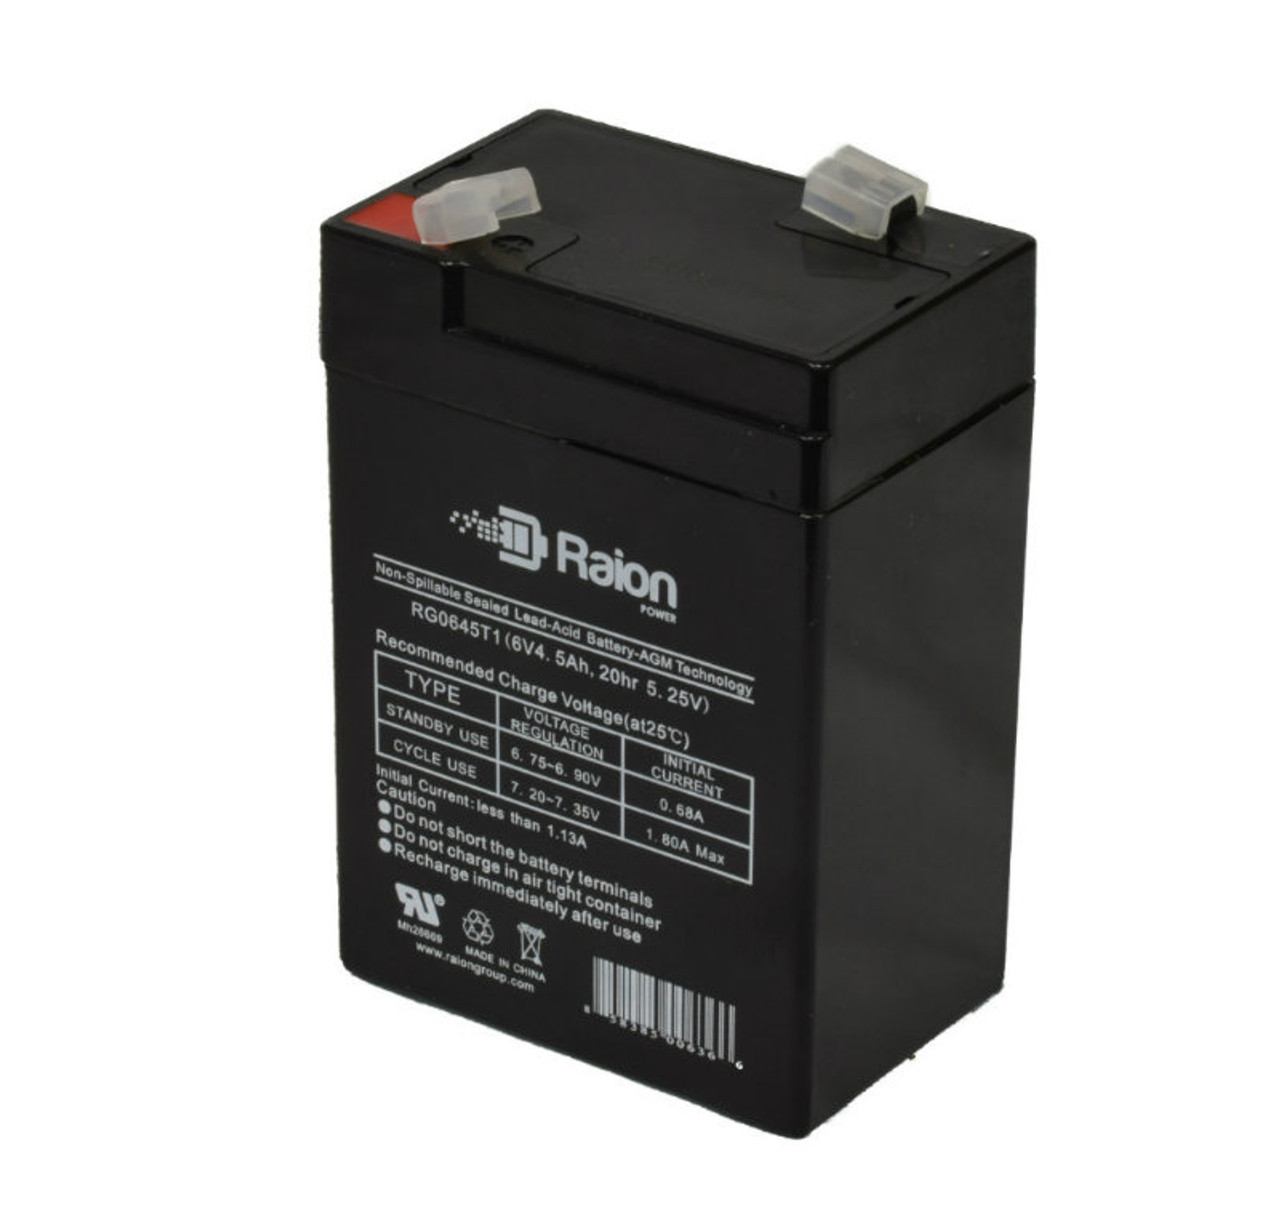 Raion Power RG0645T1 6V 4.5Ah Replacement Battery Cartridge for Lithonia AQM EL